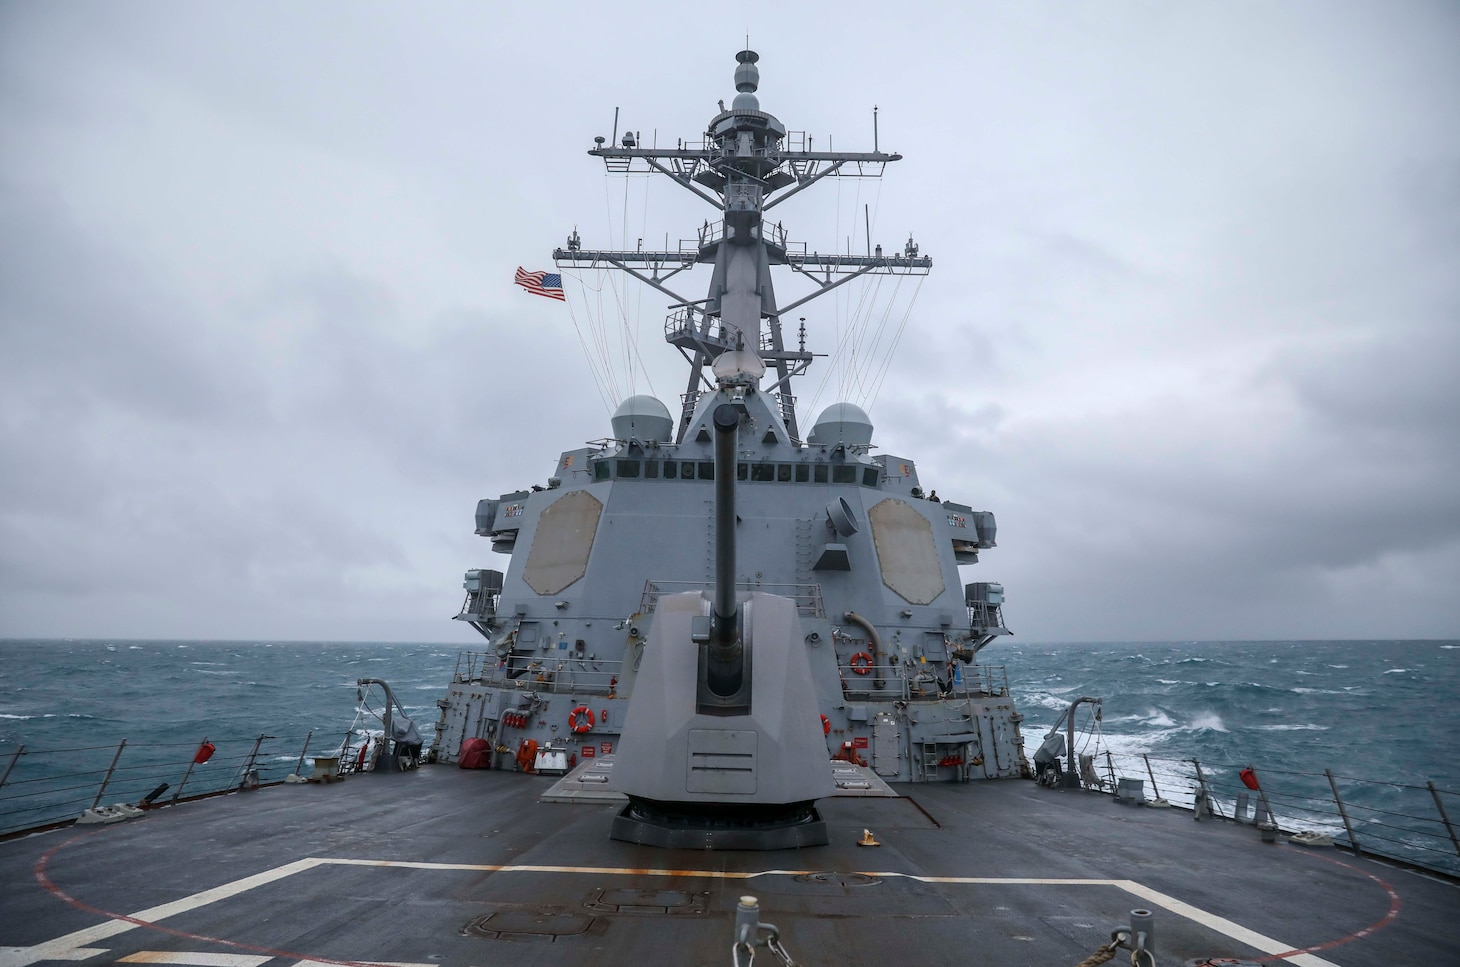 EAST CHINA SEA (Dec. 18, 2020) USS Mustin (DDG 89) conducts routine underway operations. Mustin is forward-deployed to the U.S. 7th Fleet area of operations. All nations benefit from free and open access to the maritime domain, delivering a ready, competitive, and lethal force to Combatant Commanders with the confidence and resolve to win any future contest. (U.S. Navy photo by Mass Communication Specialist Third Class Arthur Rosen)